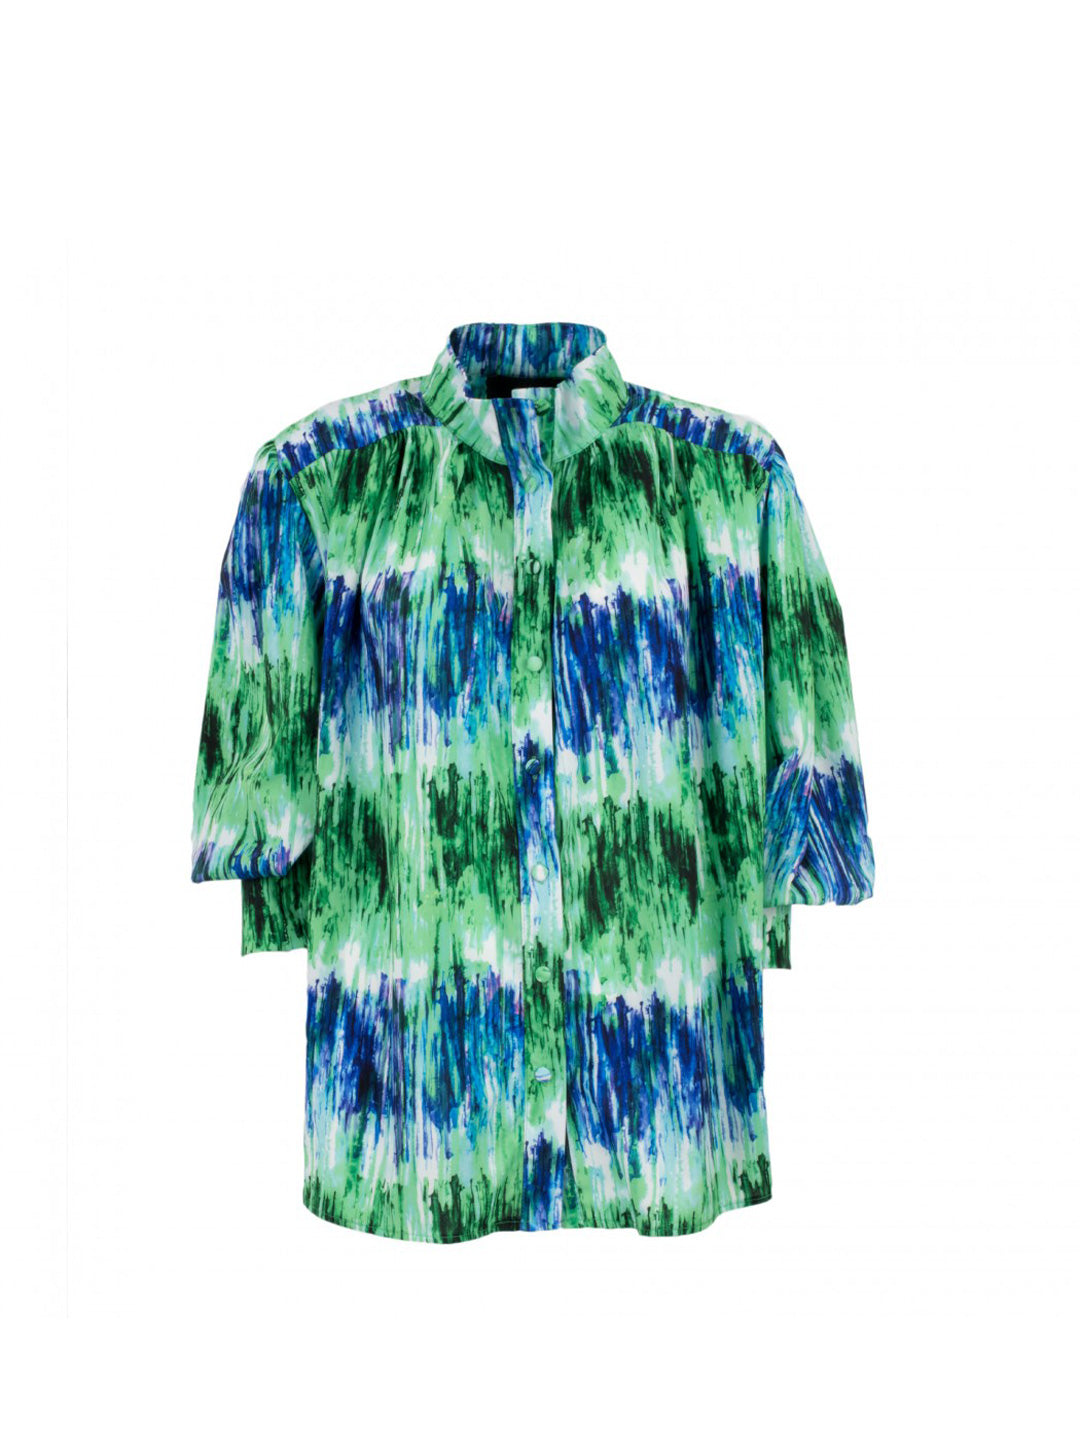 TPN Ernestine green patterned shirt with tie dye print